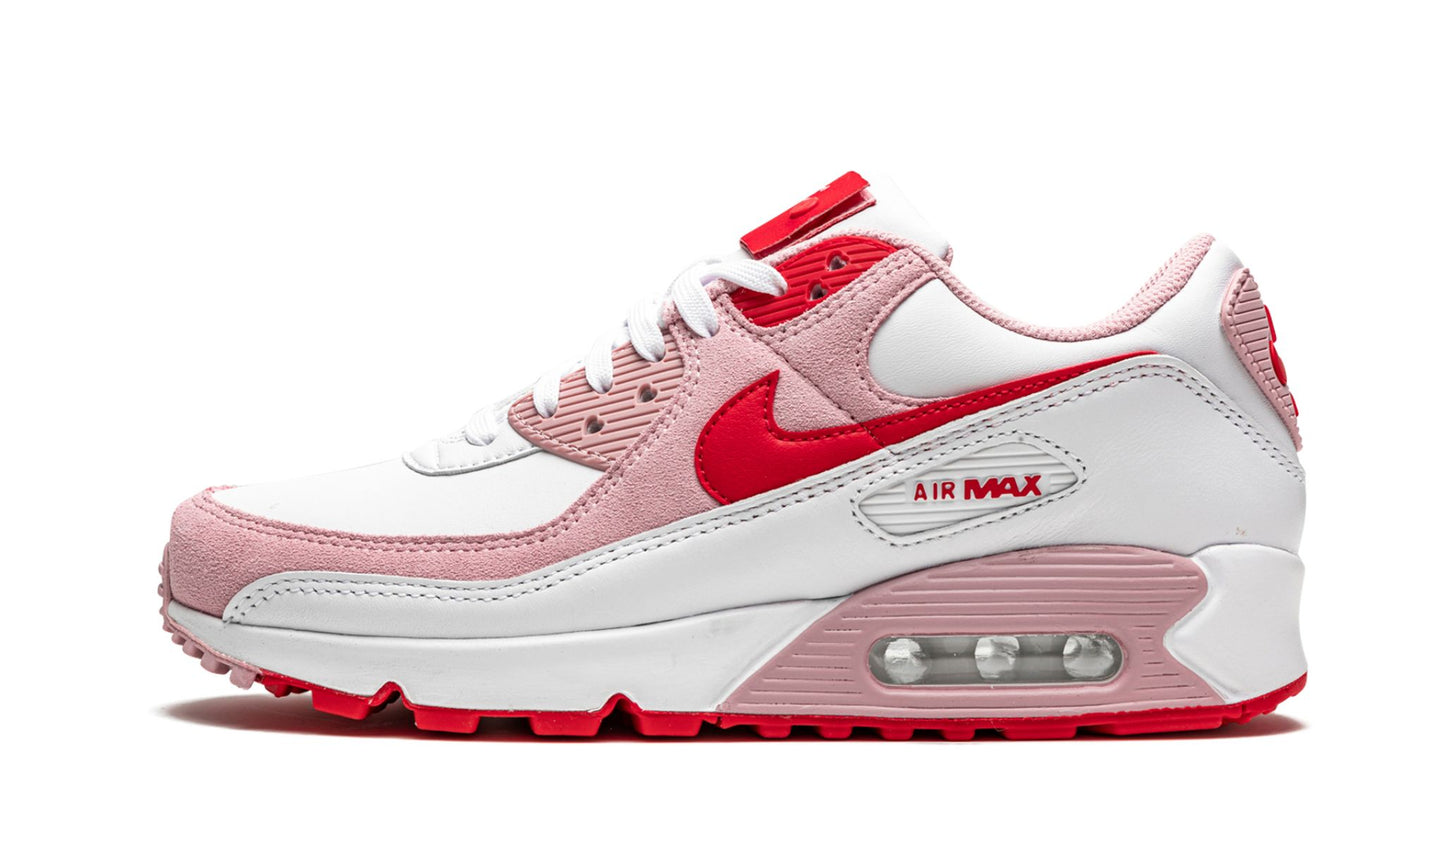 Air Max 90 WMNS "Valentines Day 2021"